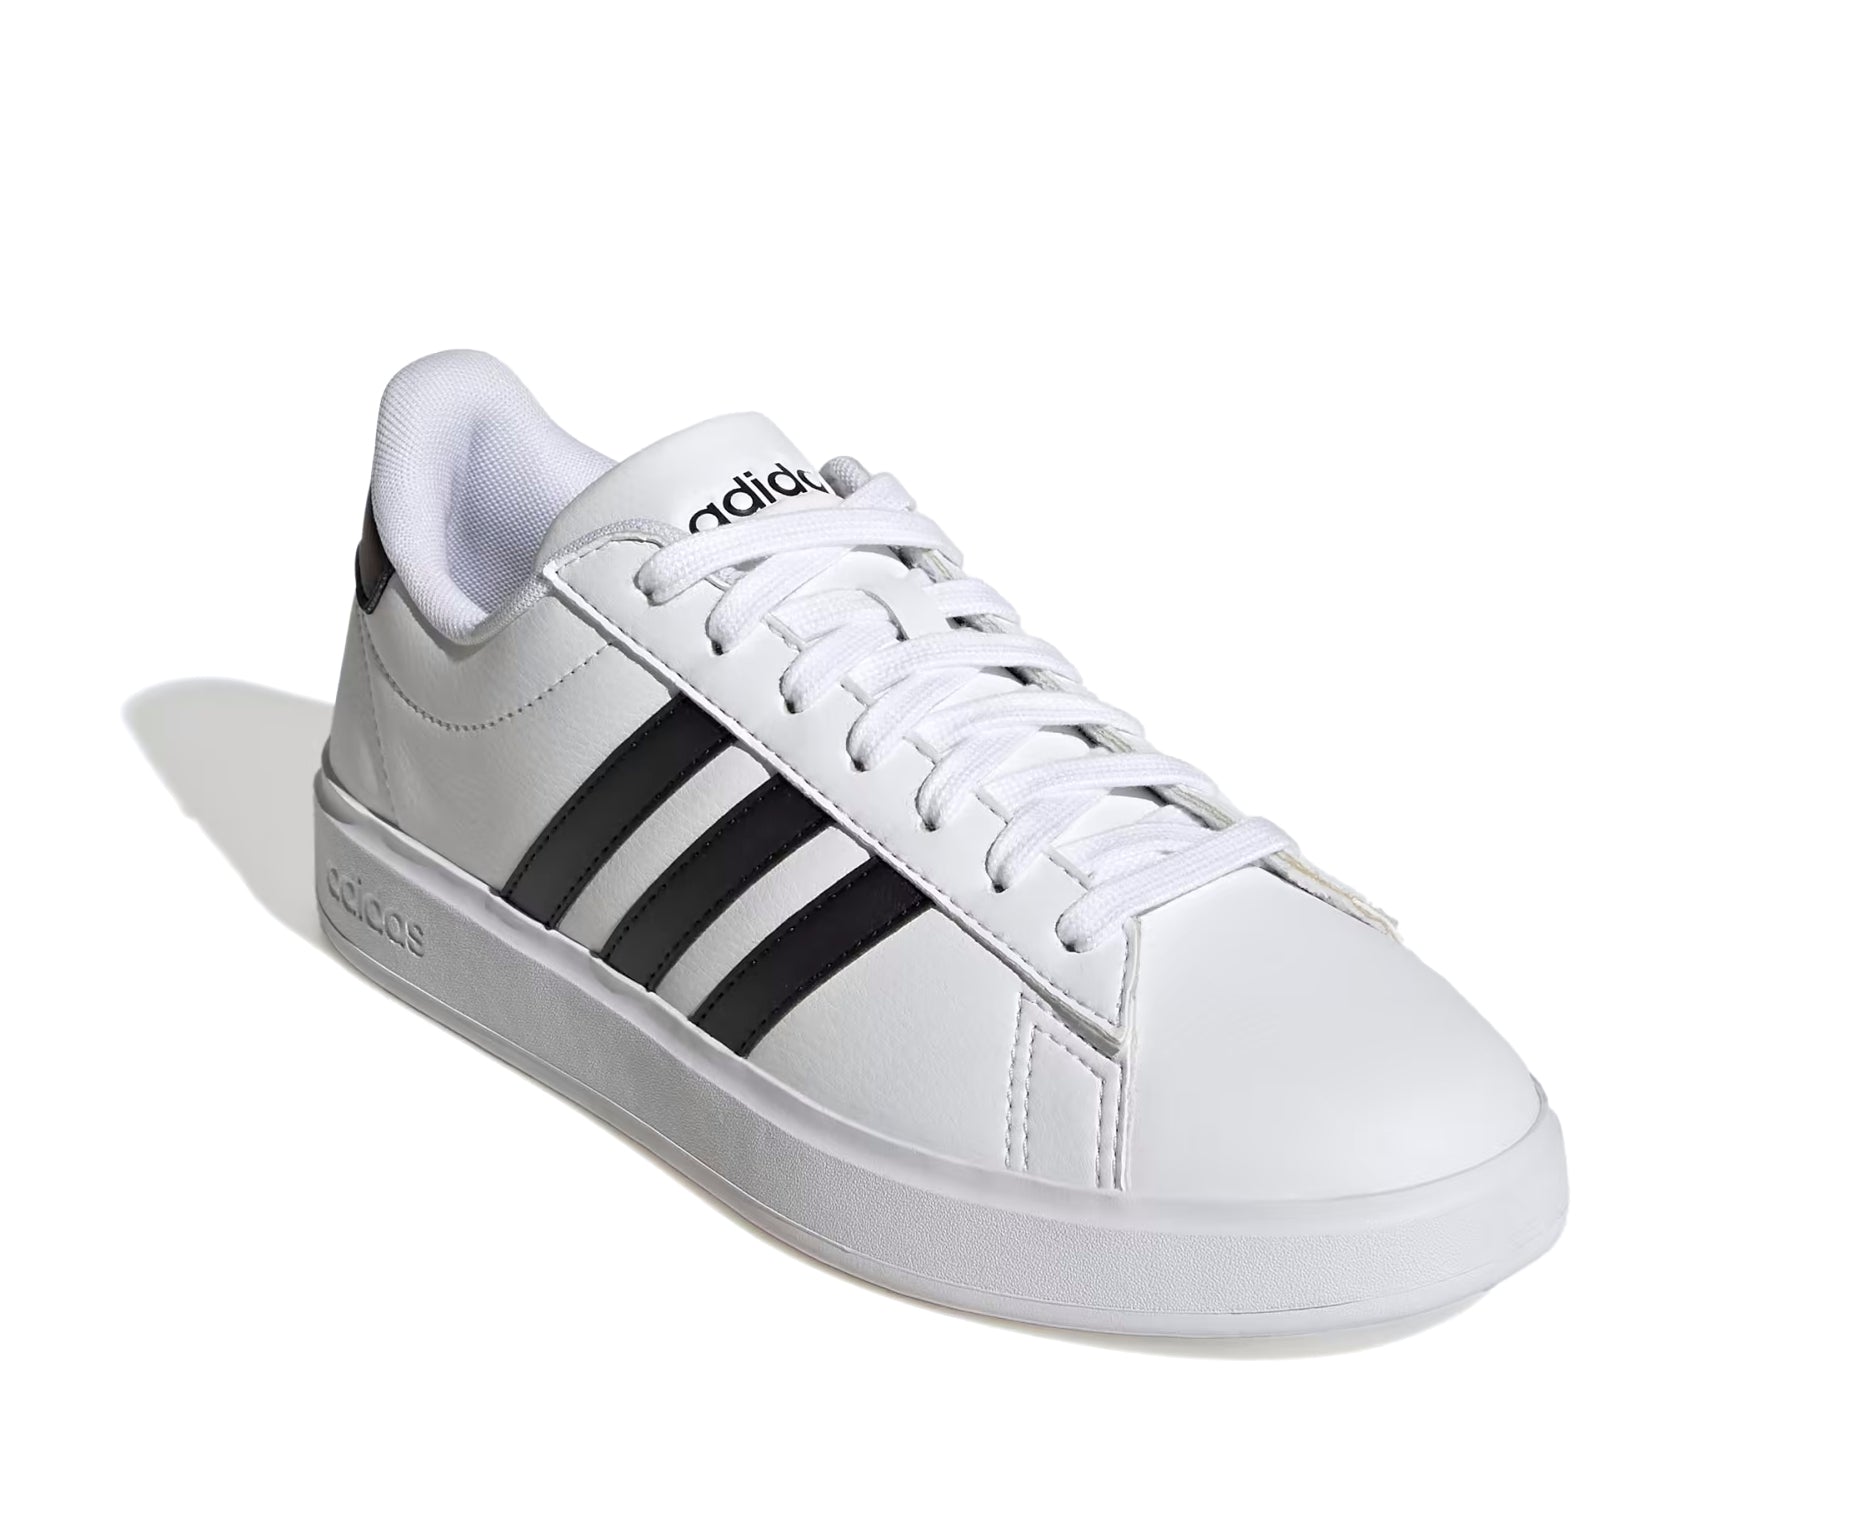 A white leather adidas sneaker with black accents.